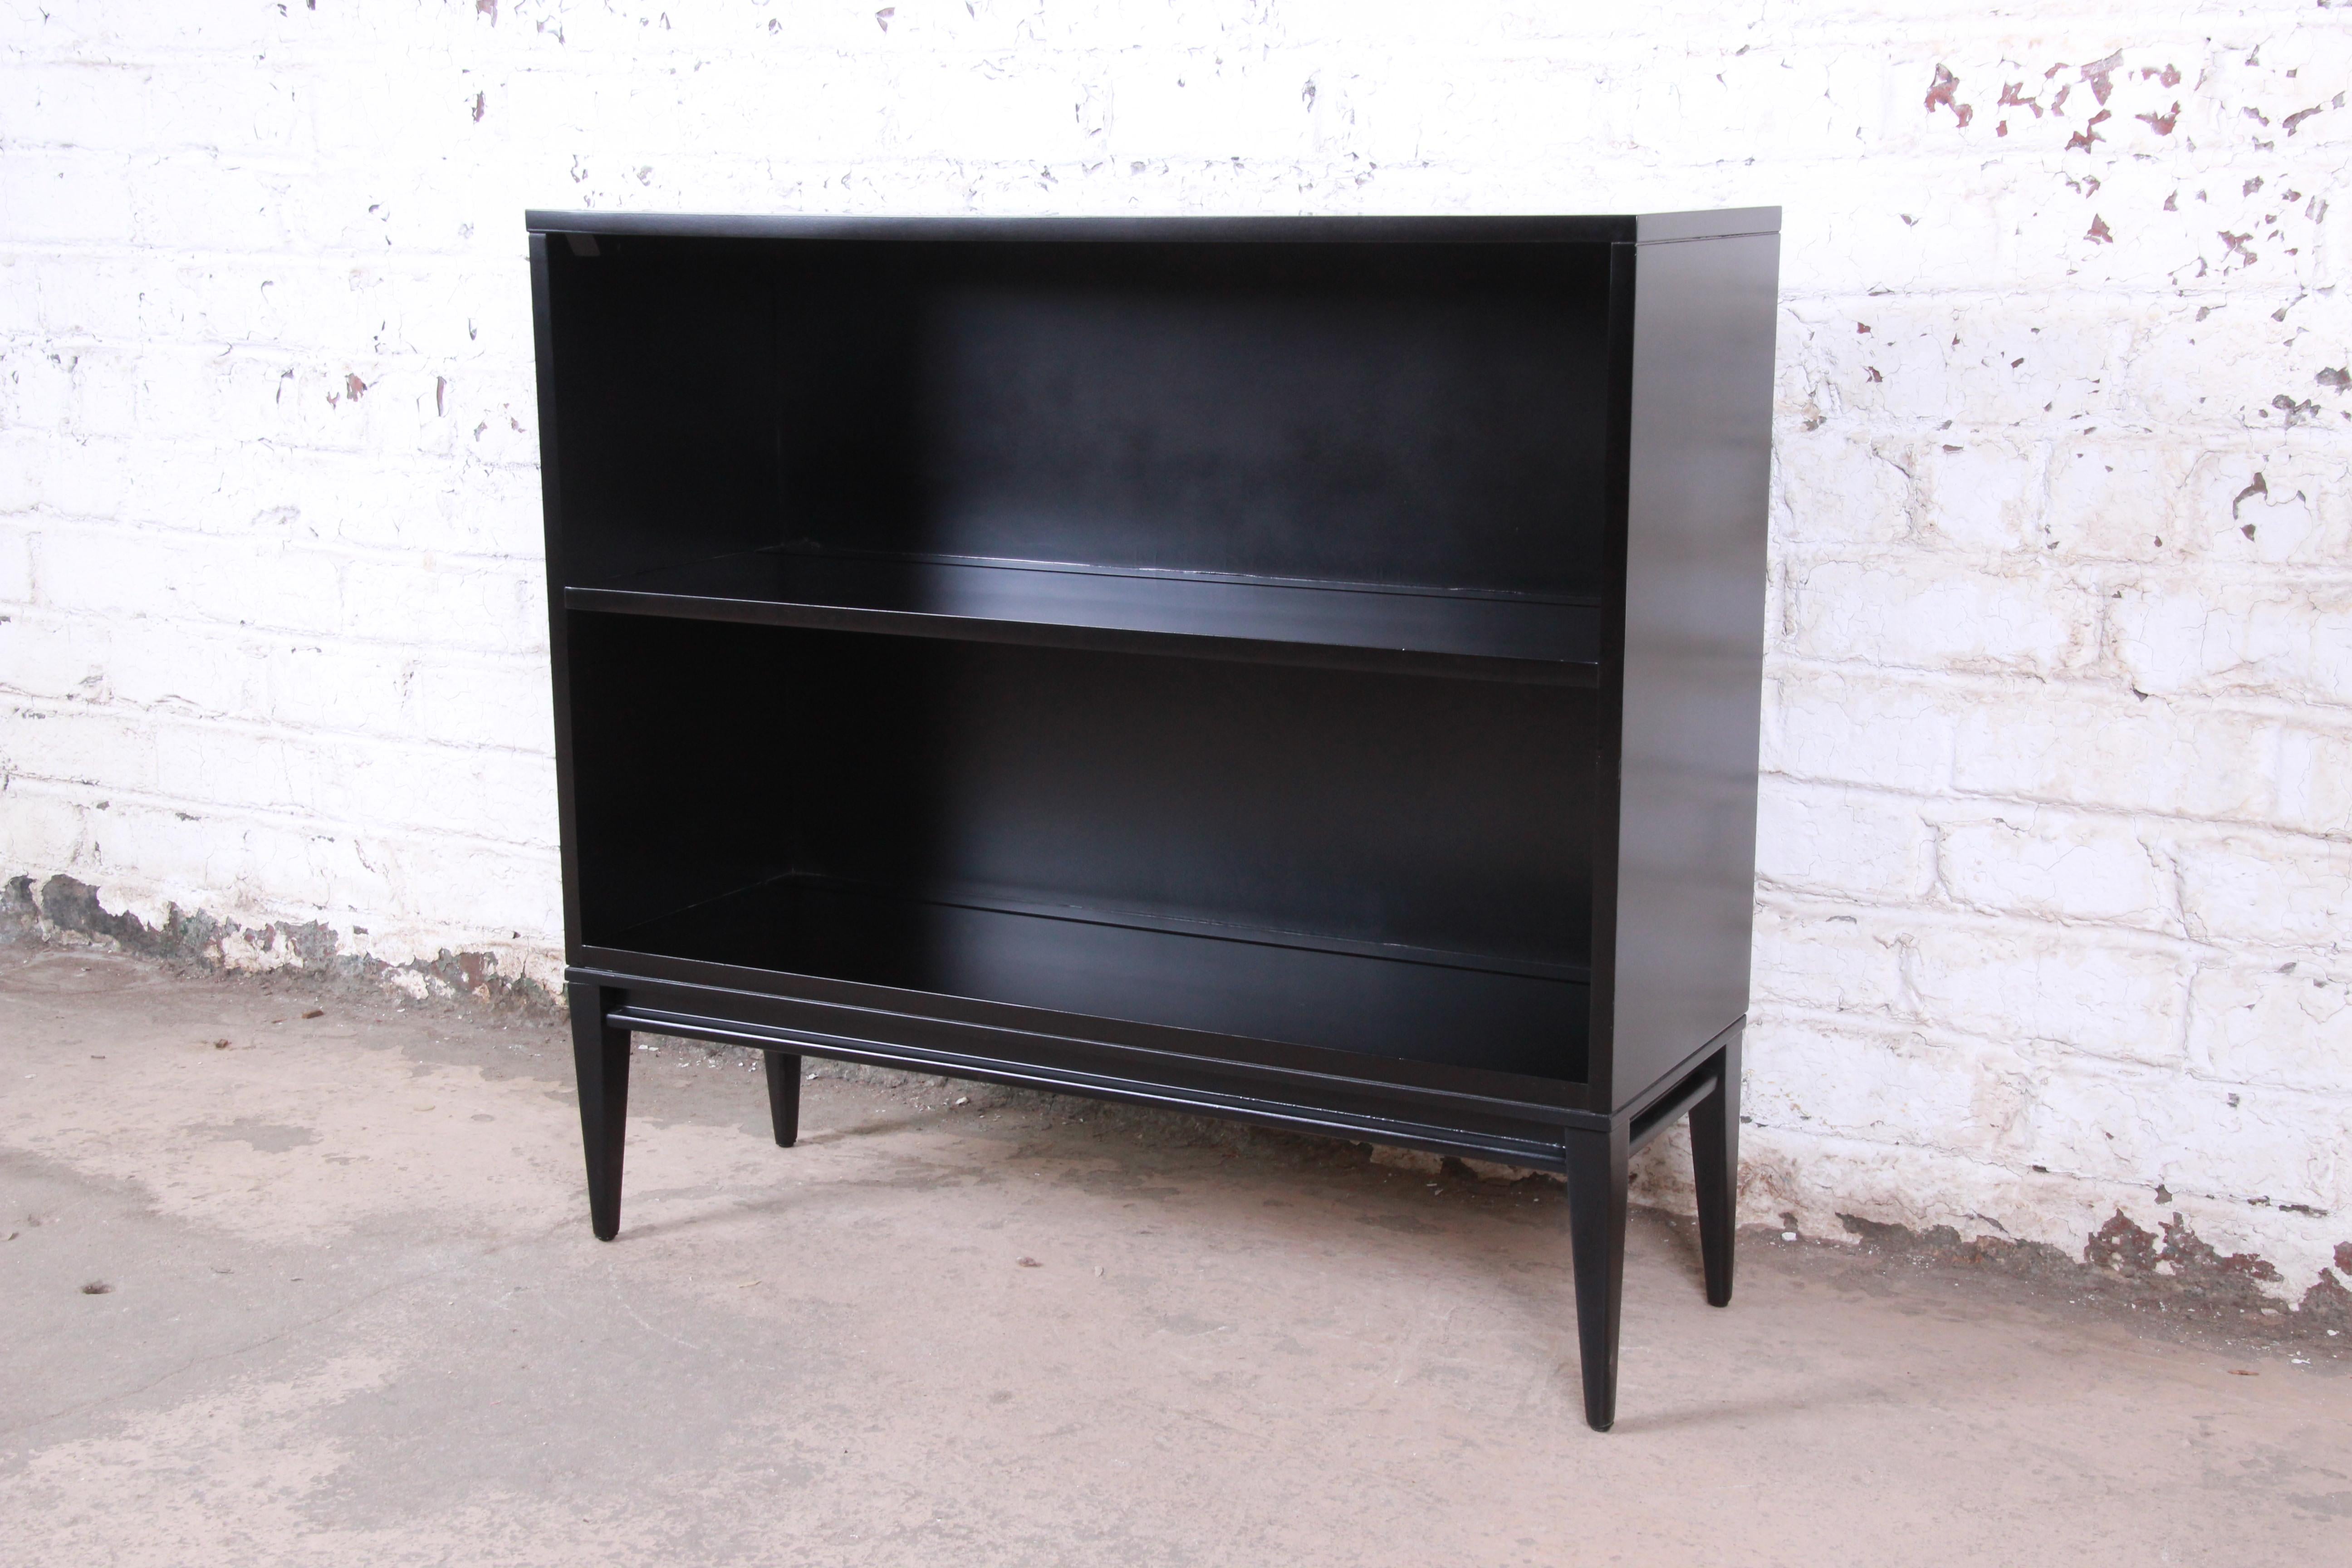 An exceptional Mid-Century Modern bookcase

Designed by Paul McCobb for Winchendon Furniture 